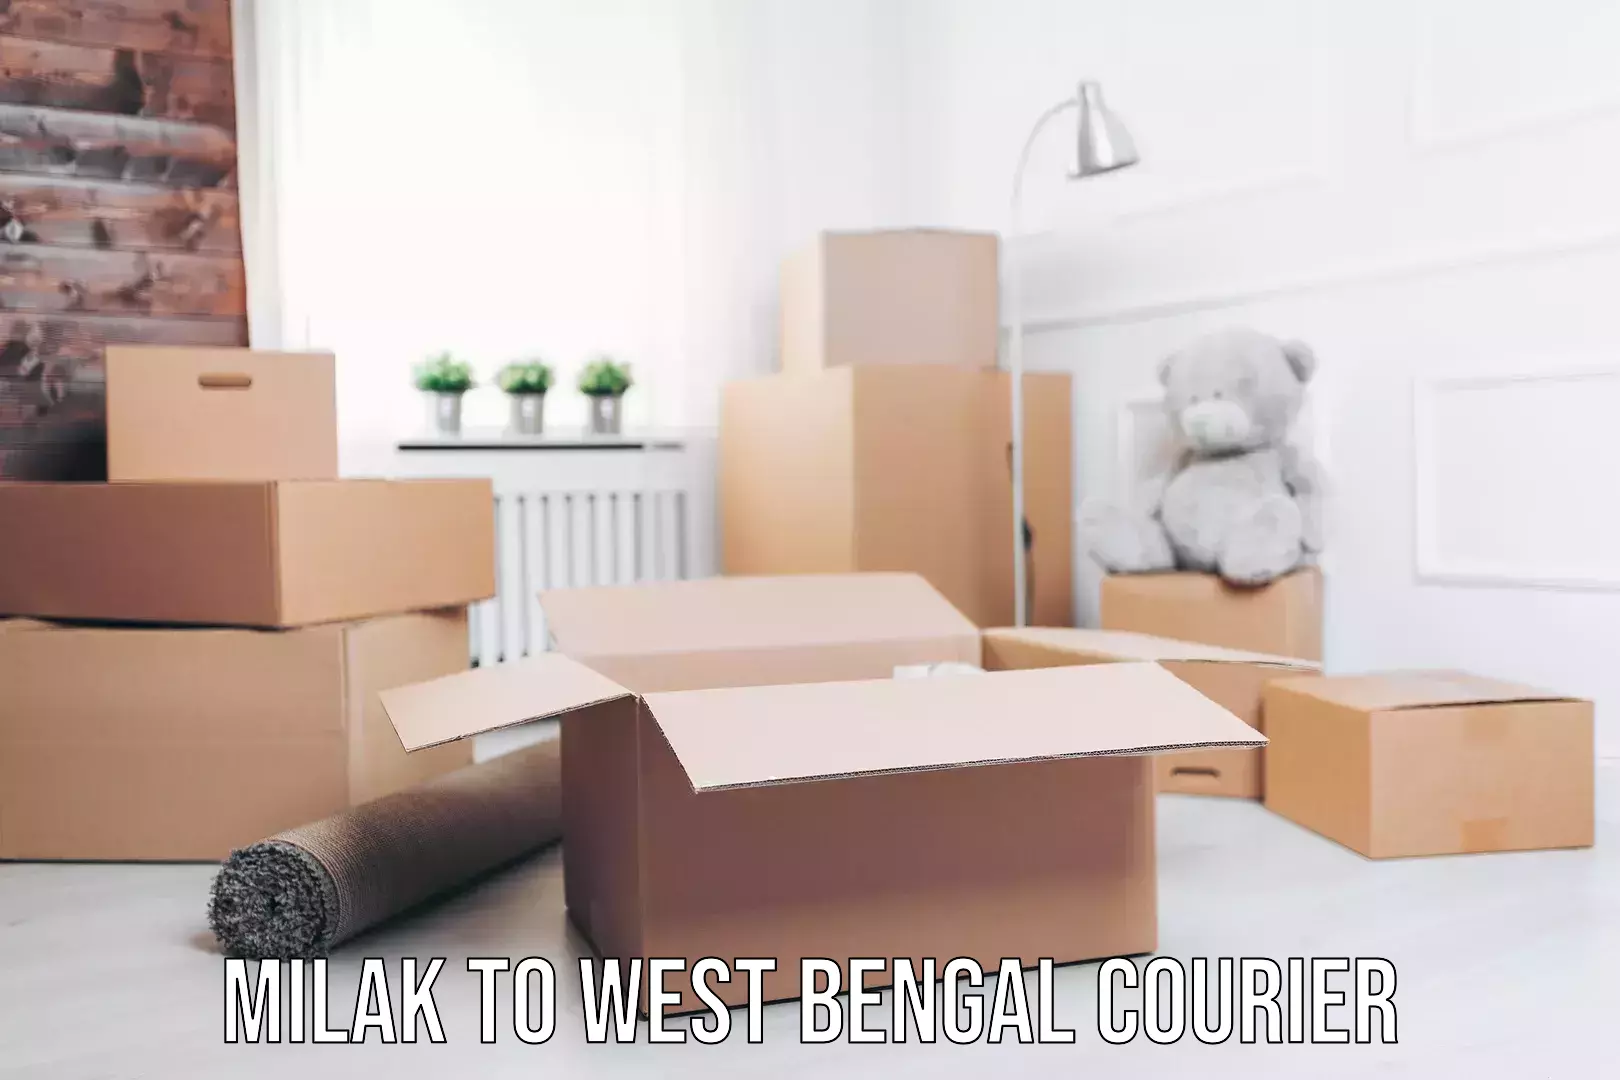 Skilled furniture transporters Milak to West Bengal